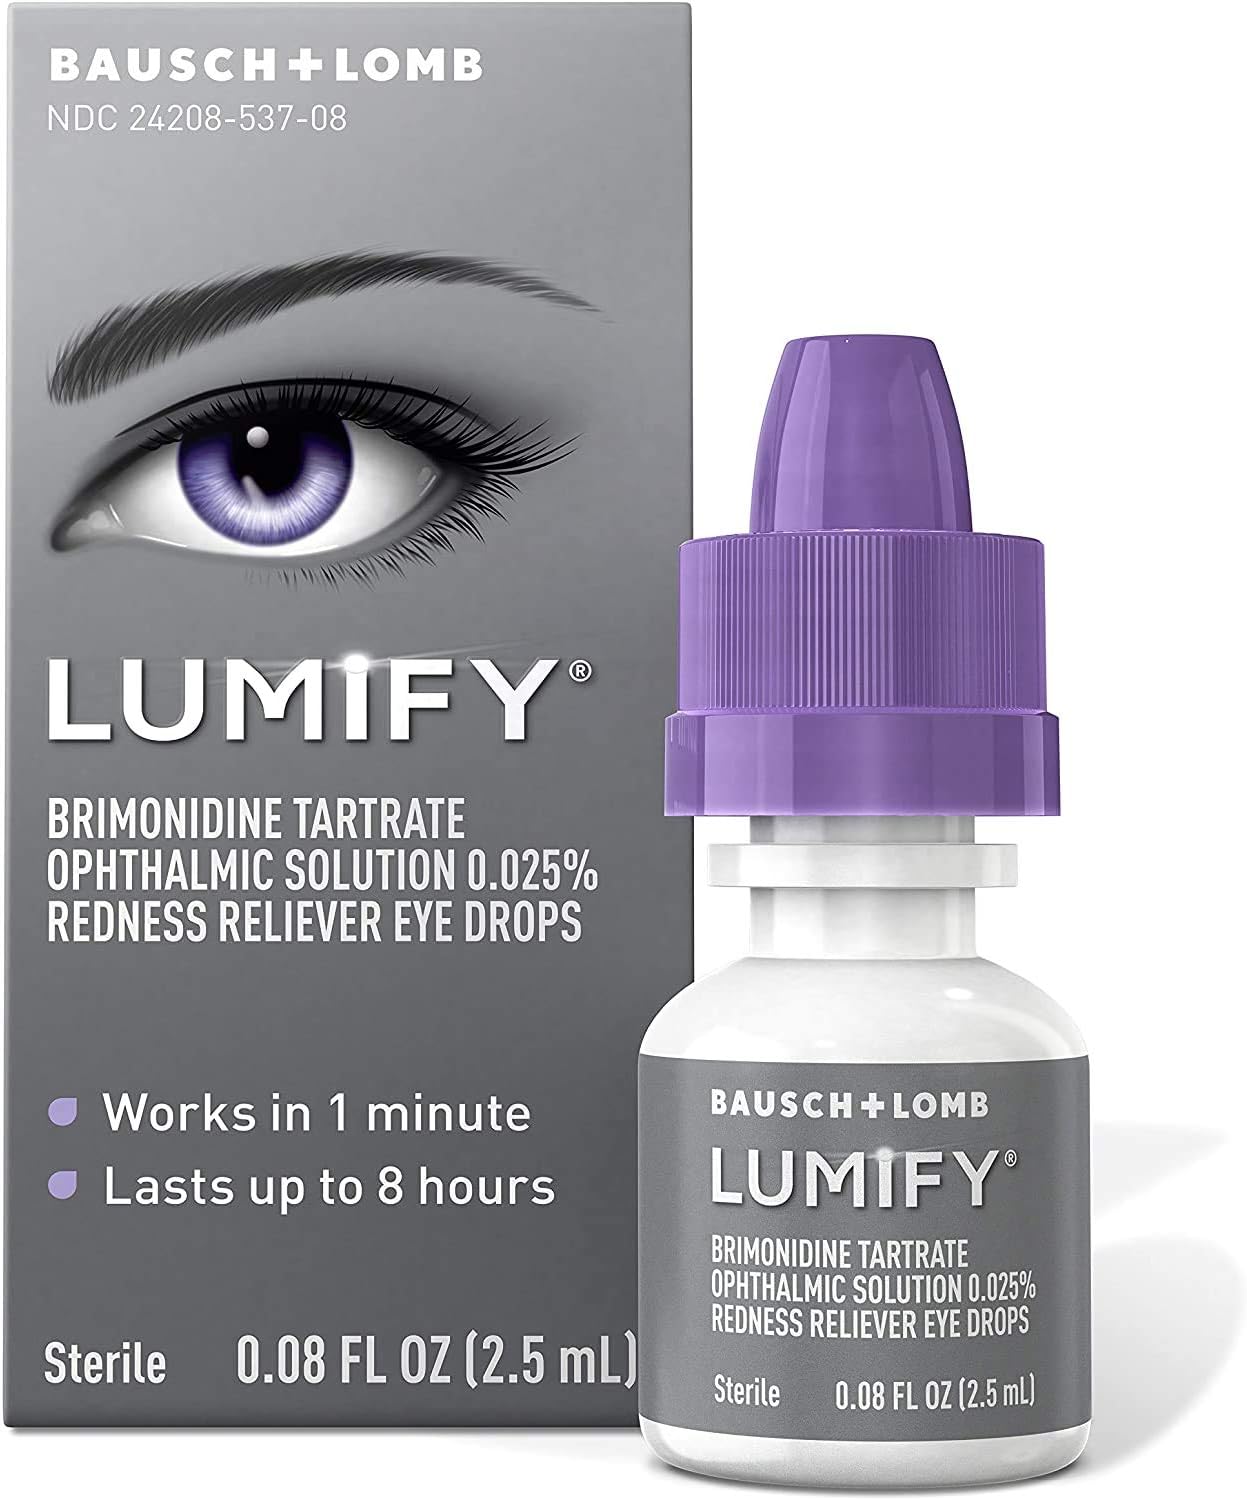 Bausch + Lomb Lumify Redness Reliever Eye Dro…